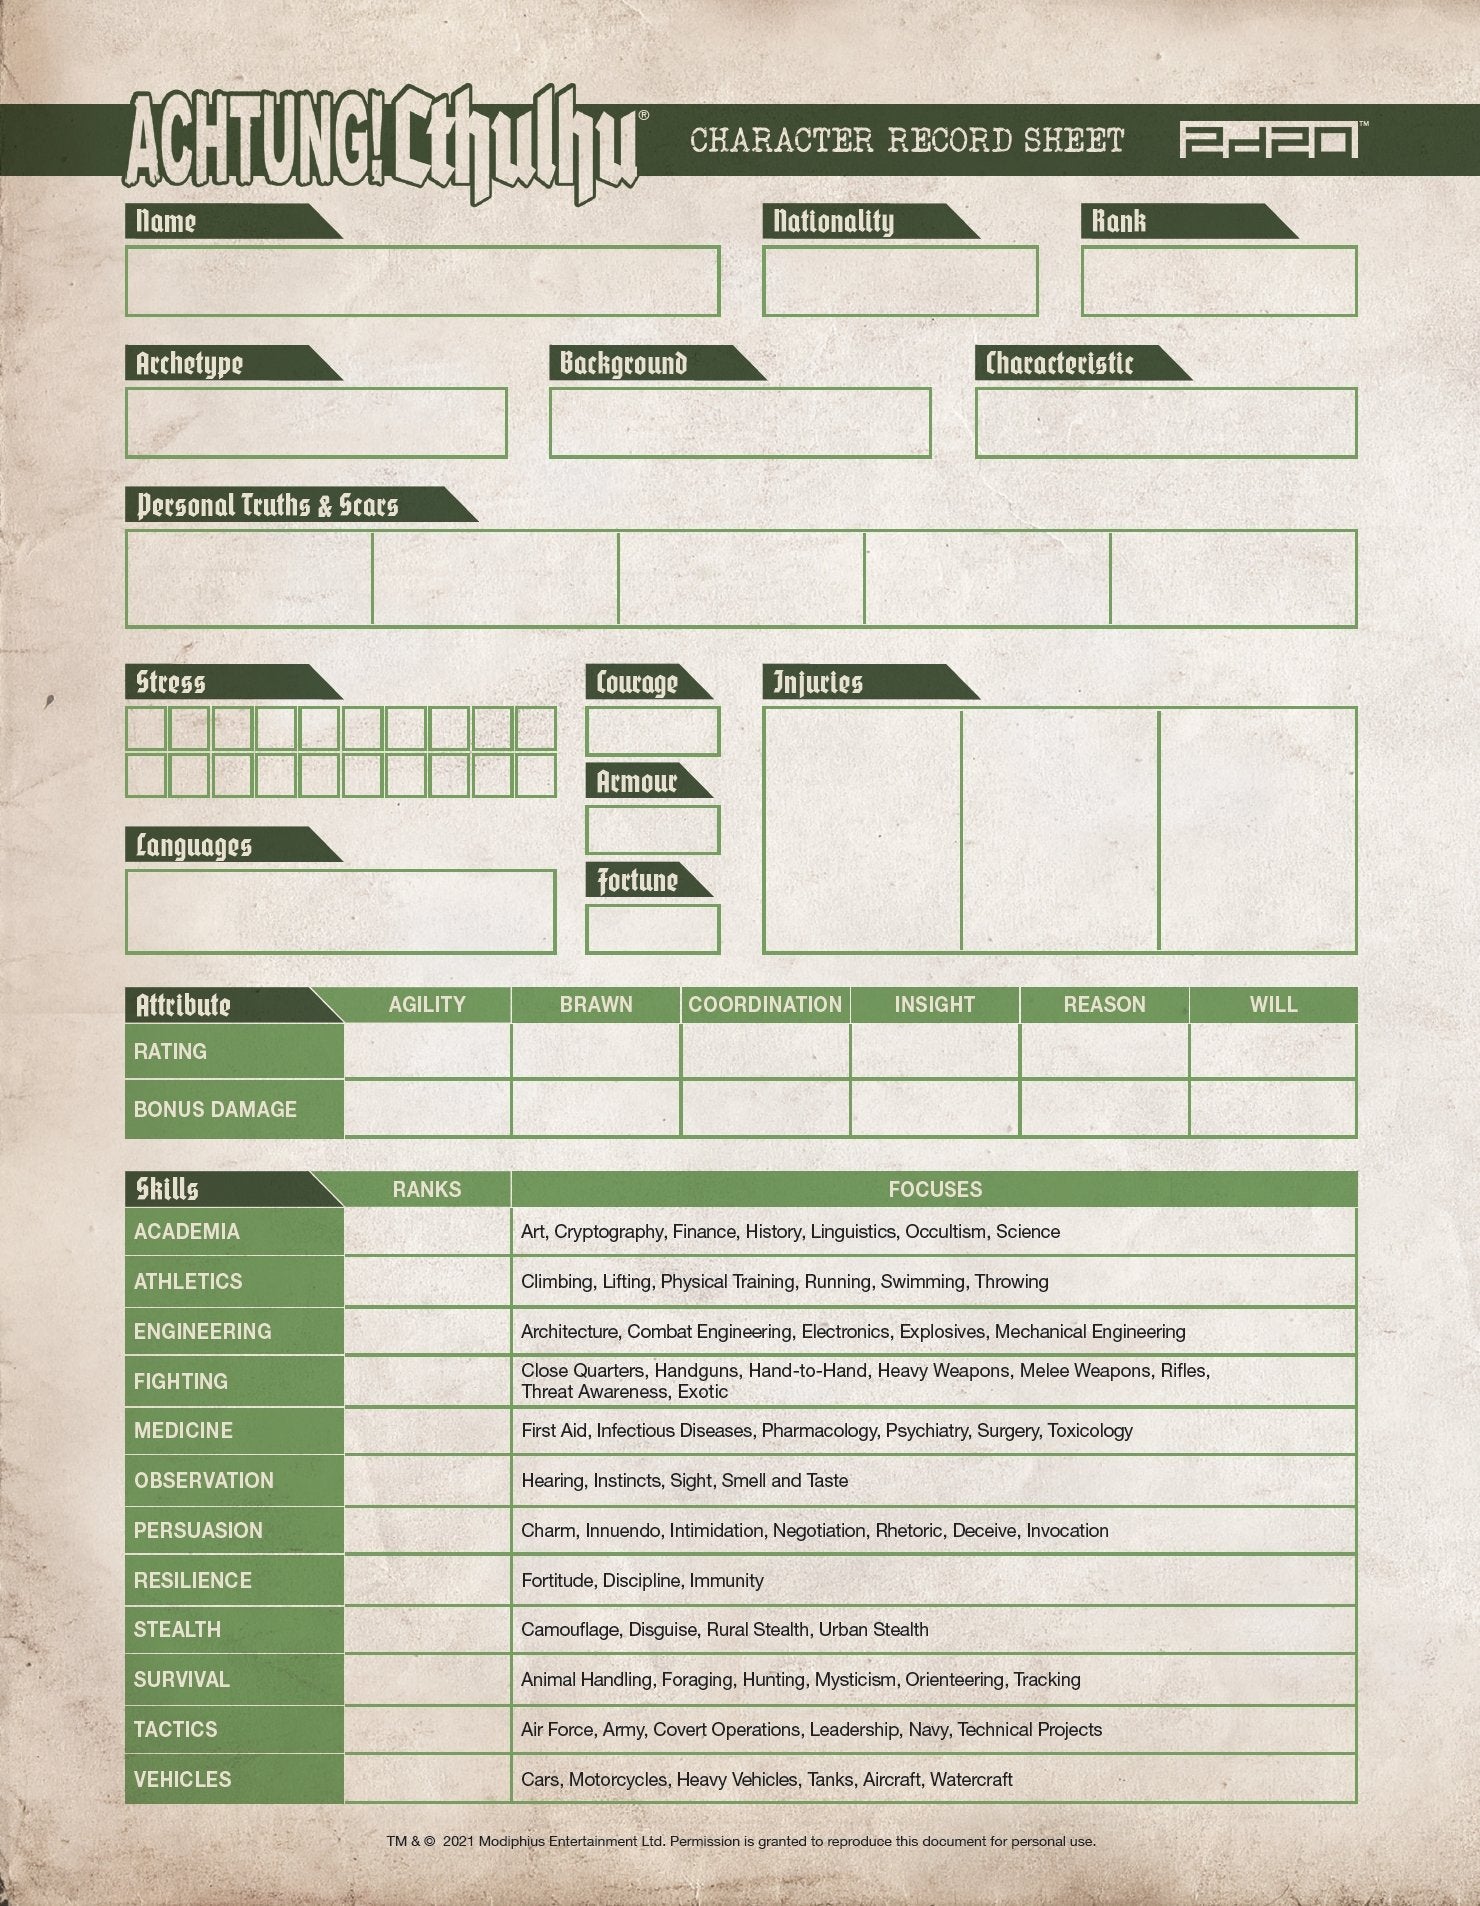 call of cthulhu rpg character sheet explained